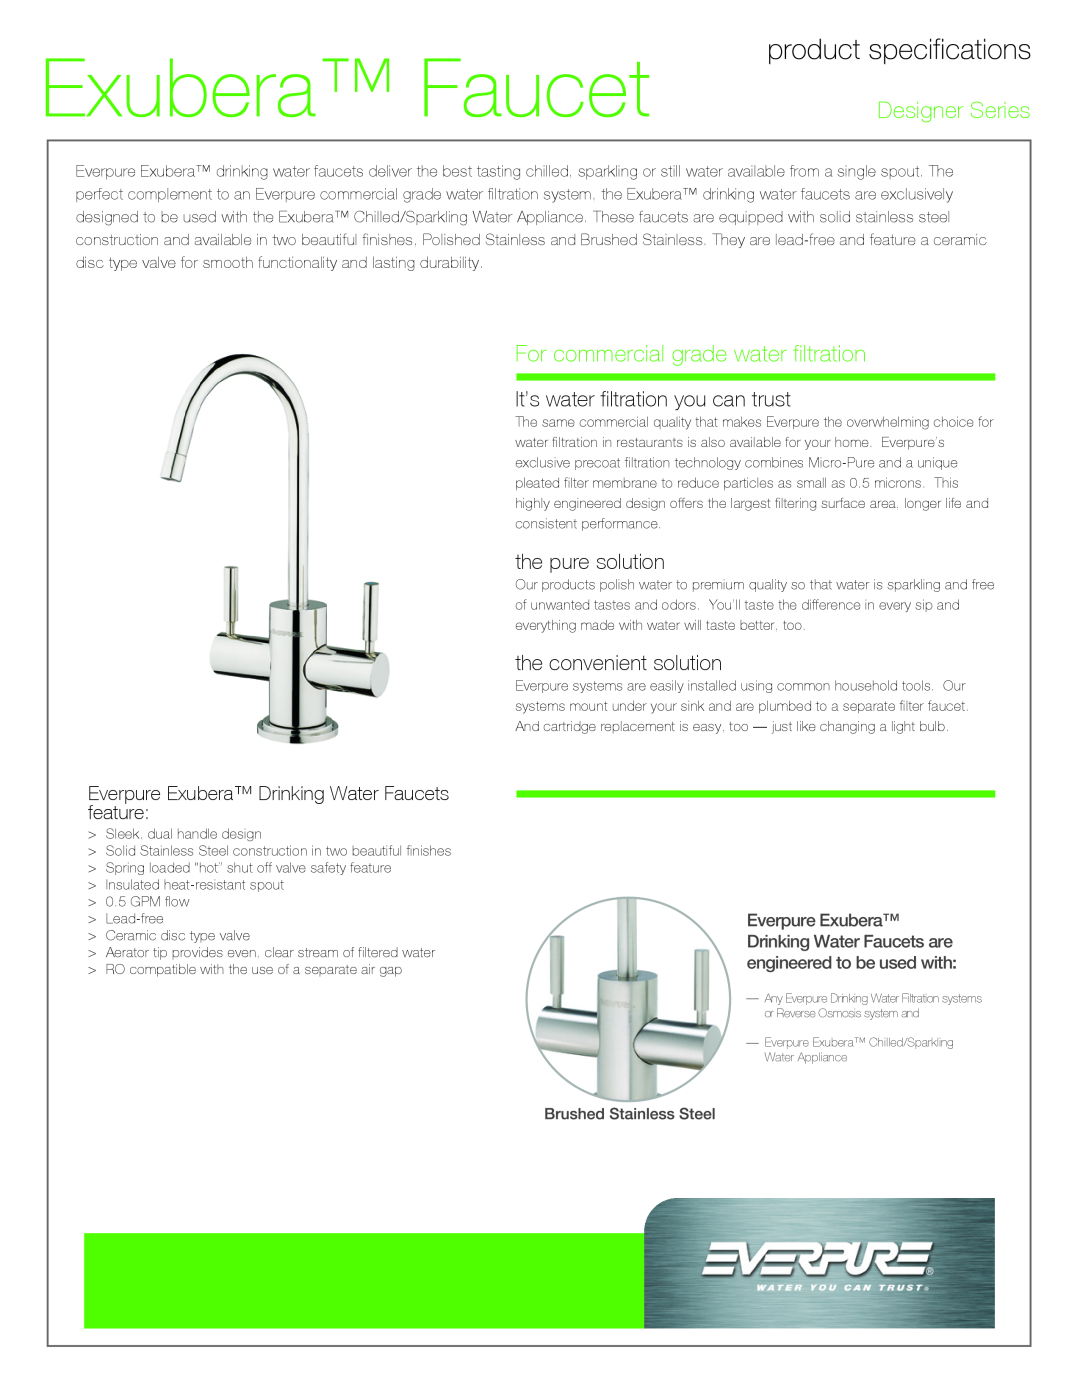 Everpure EV9000-84 manual Exubera Faucet, Designer Series, For commercial grade water filtration, the pure solution 